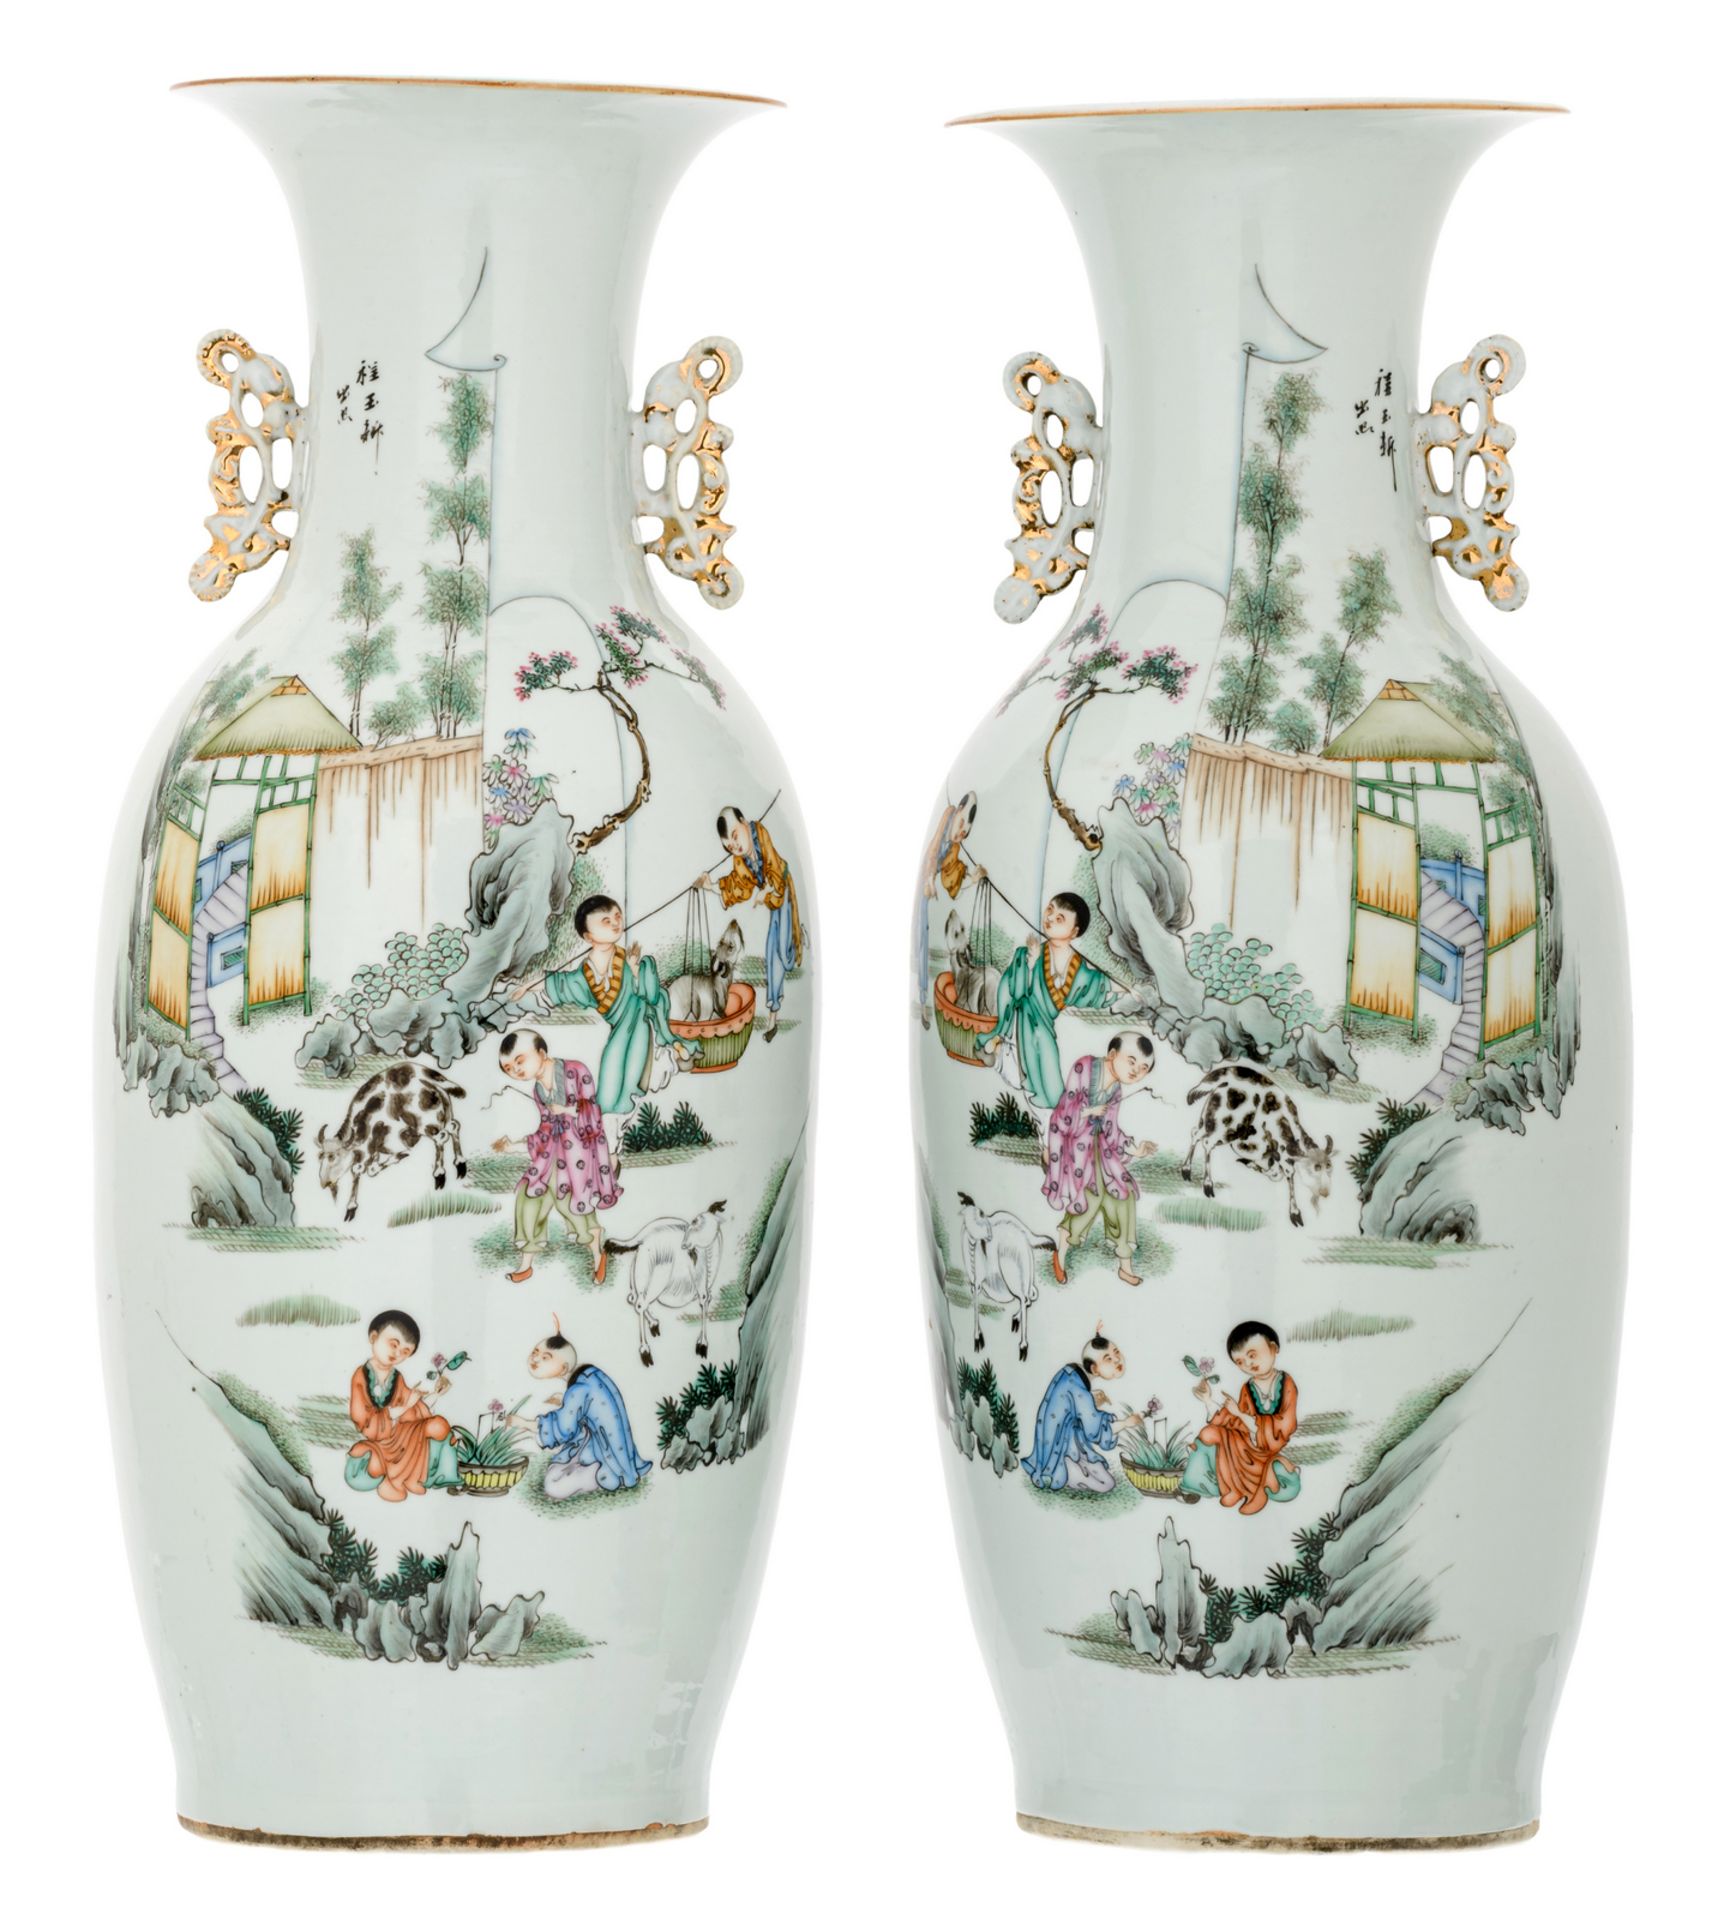 A pair of Chinese polychrome decorated vases with goats, boys playing in a garden and calligraphic